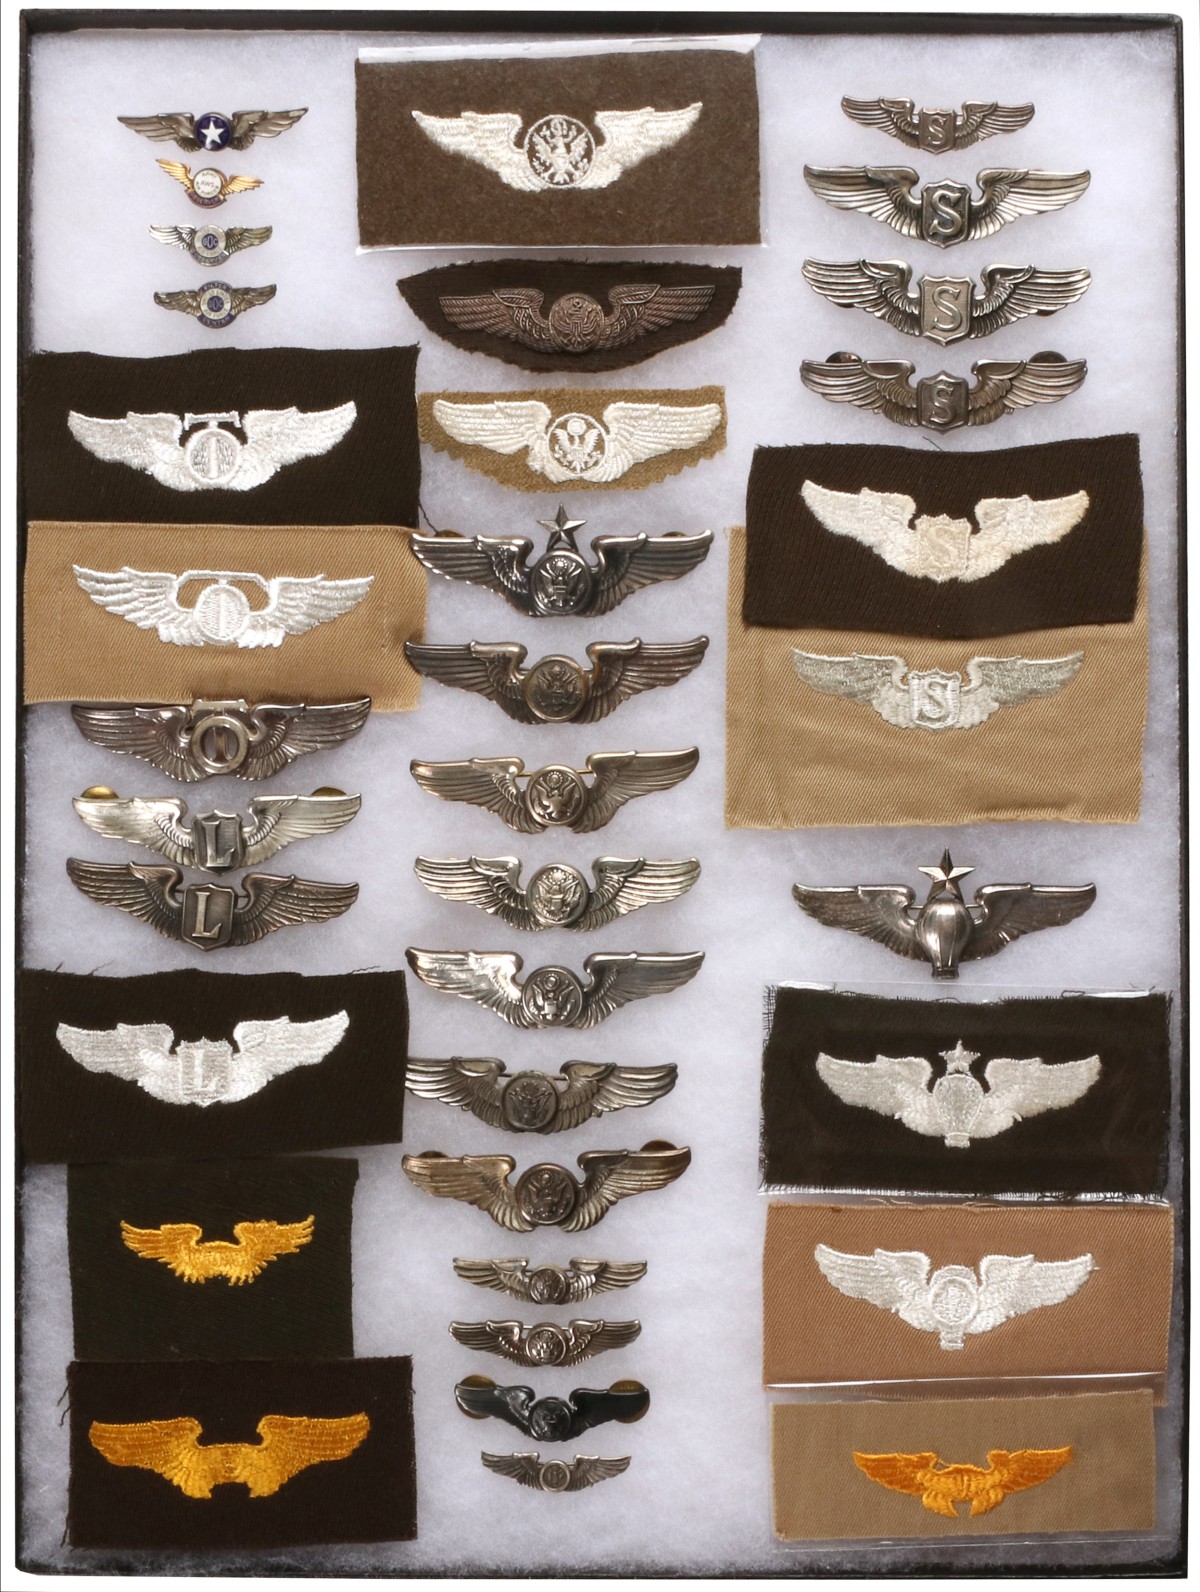 A VALUABLE COLLECTION OF 36 WWII AVIATOR'S WINGS